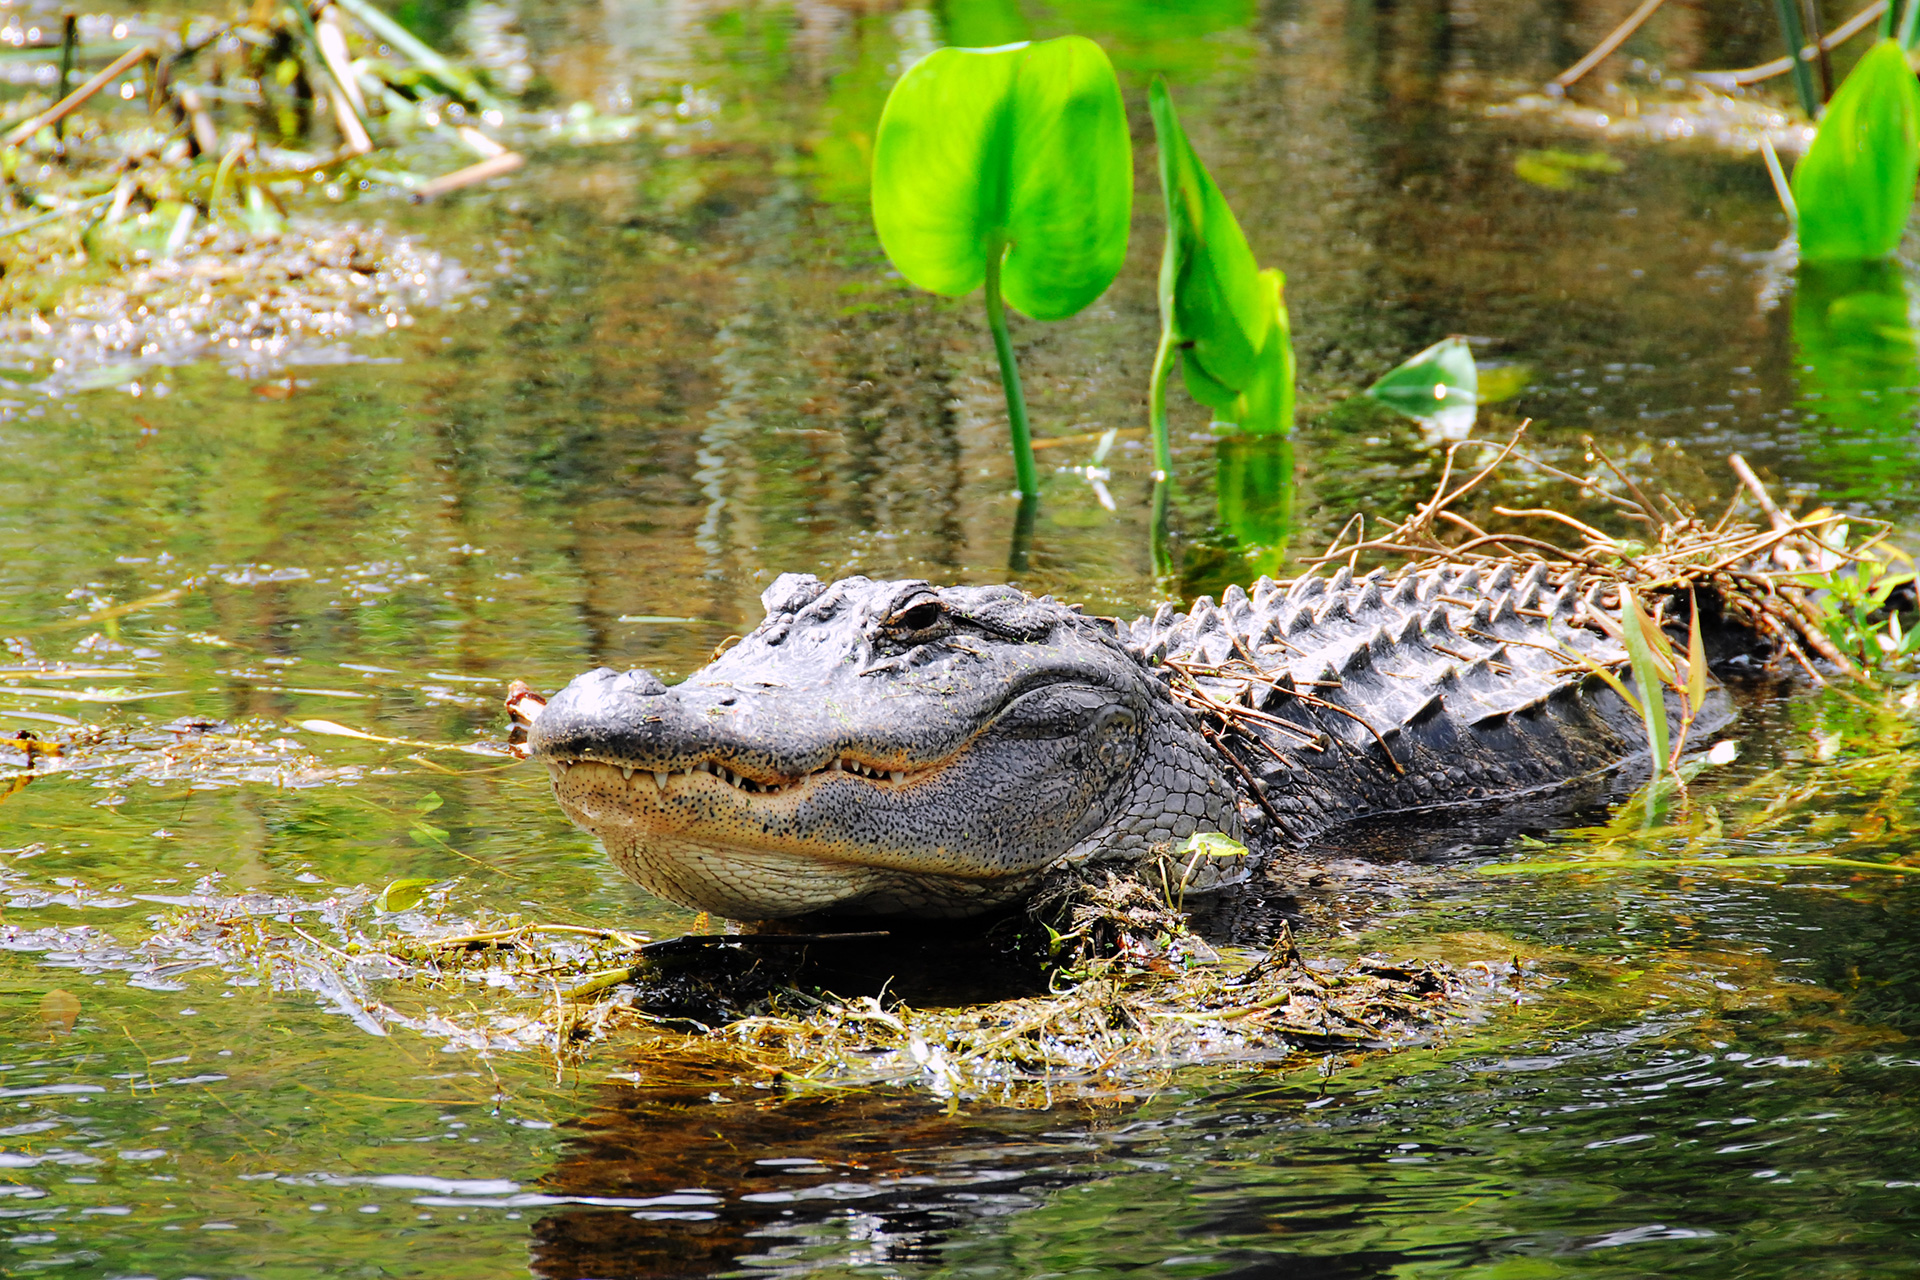 Alligator in a Swamp in Tallahassee